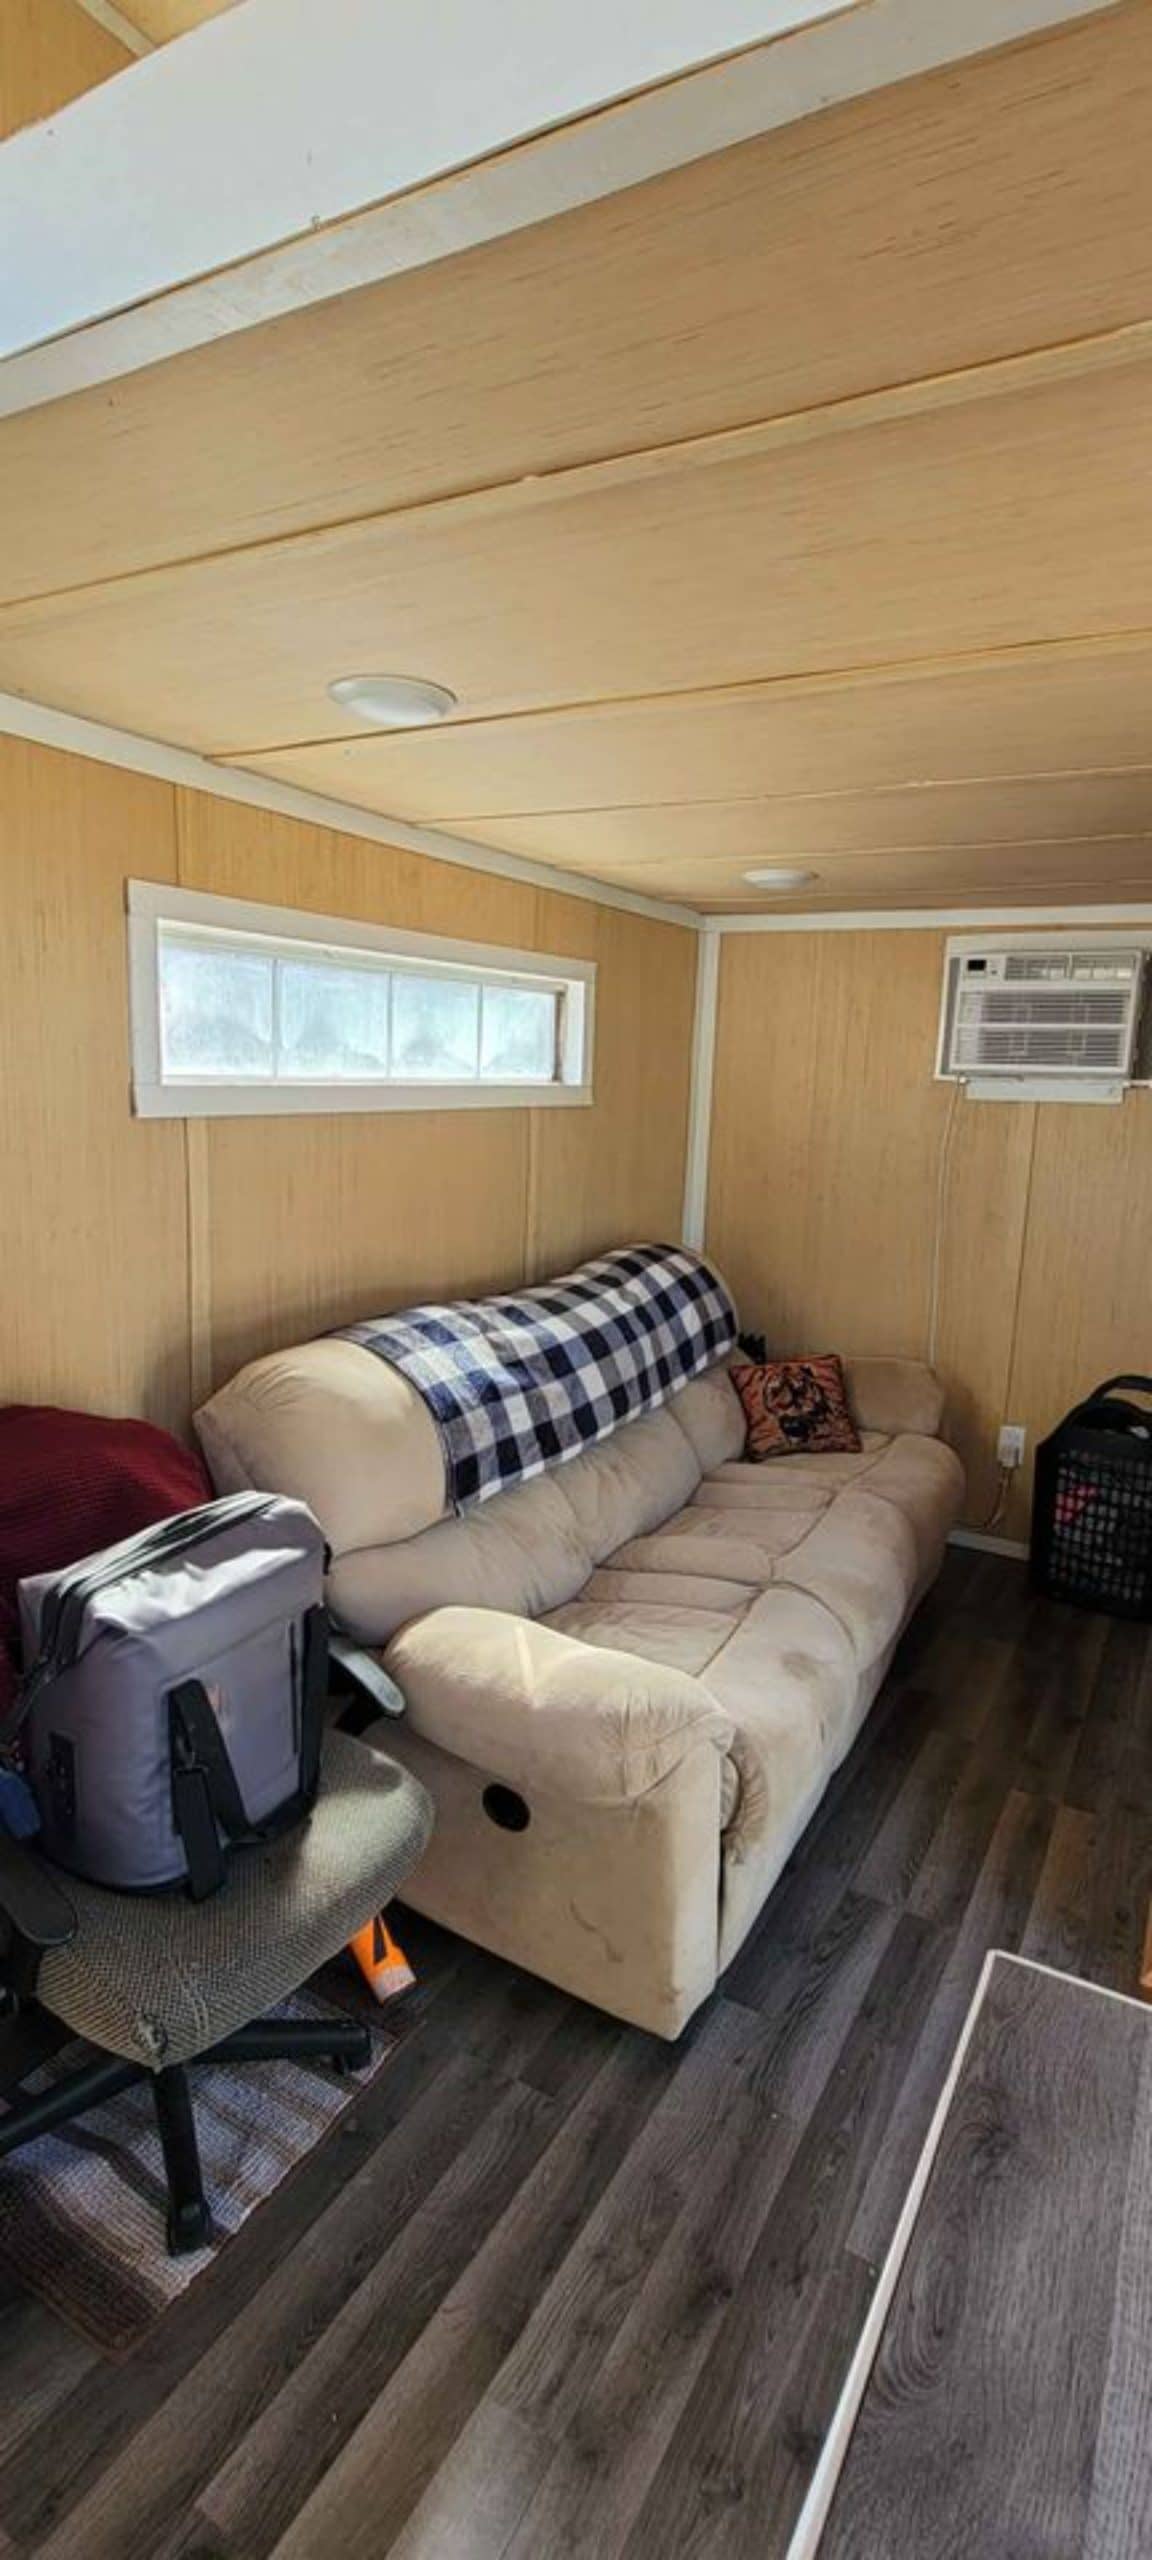 Living area of 28' Budget Friendly Tiny House has a comfortable couch on 1 side